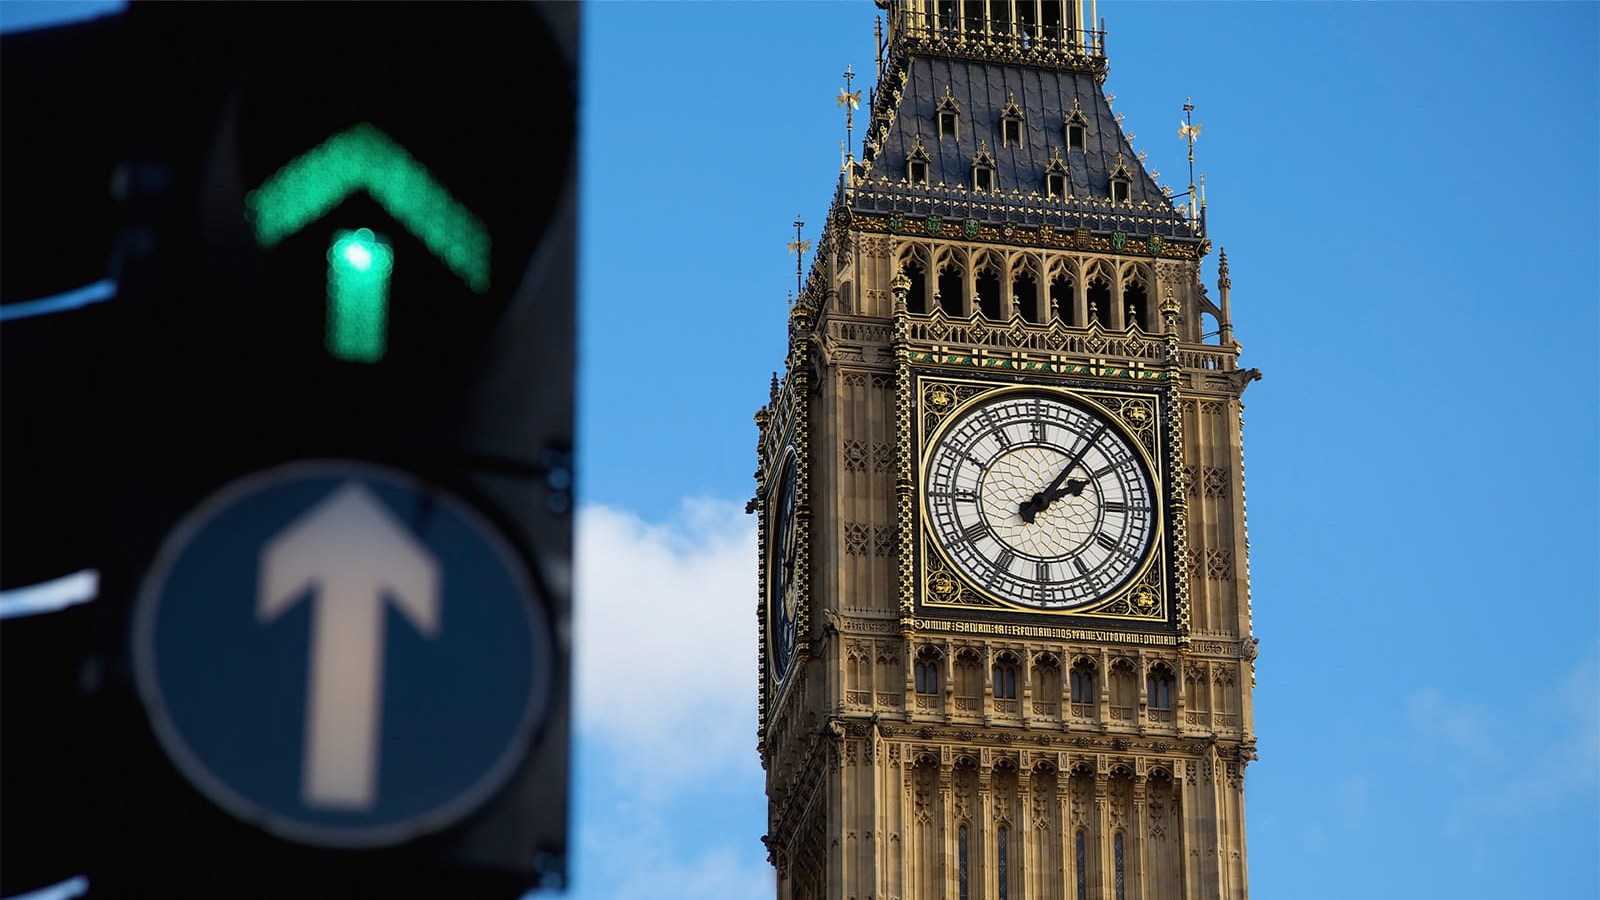 Westminster clock tower London parliament in front of blue sky with a green arrow traffic light next to it